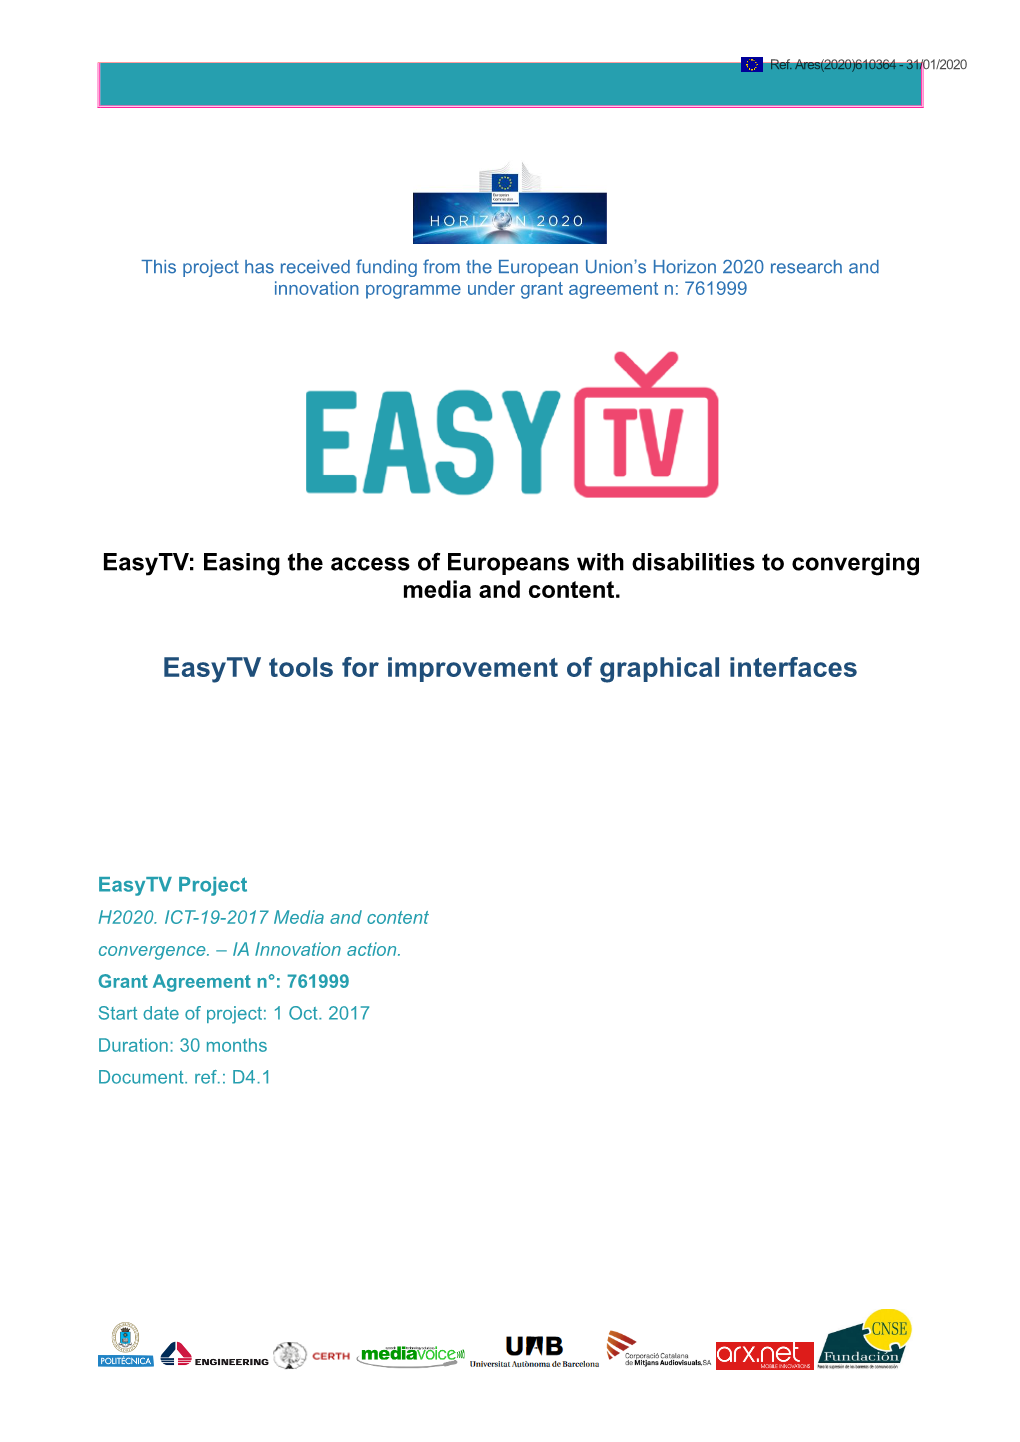 D2.2: Easytv Tools for Improvement of Graphical Interfaces